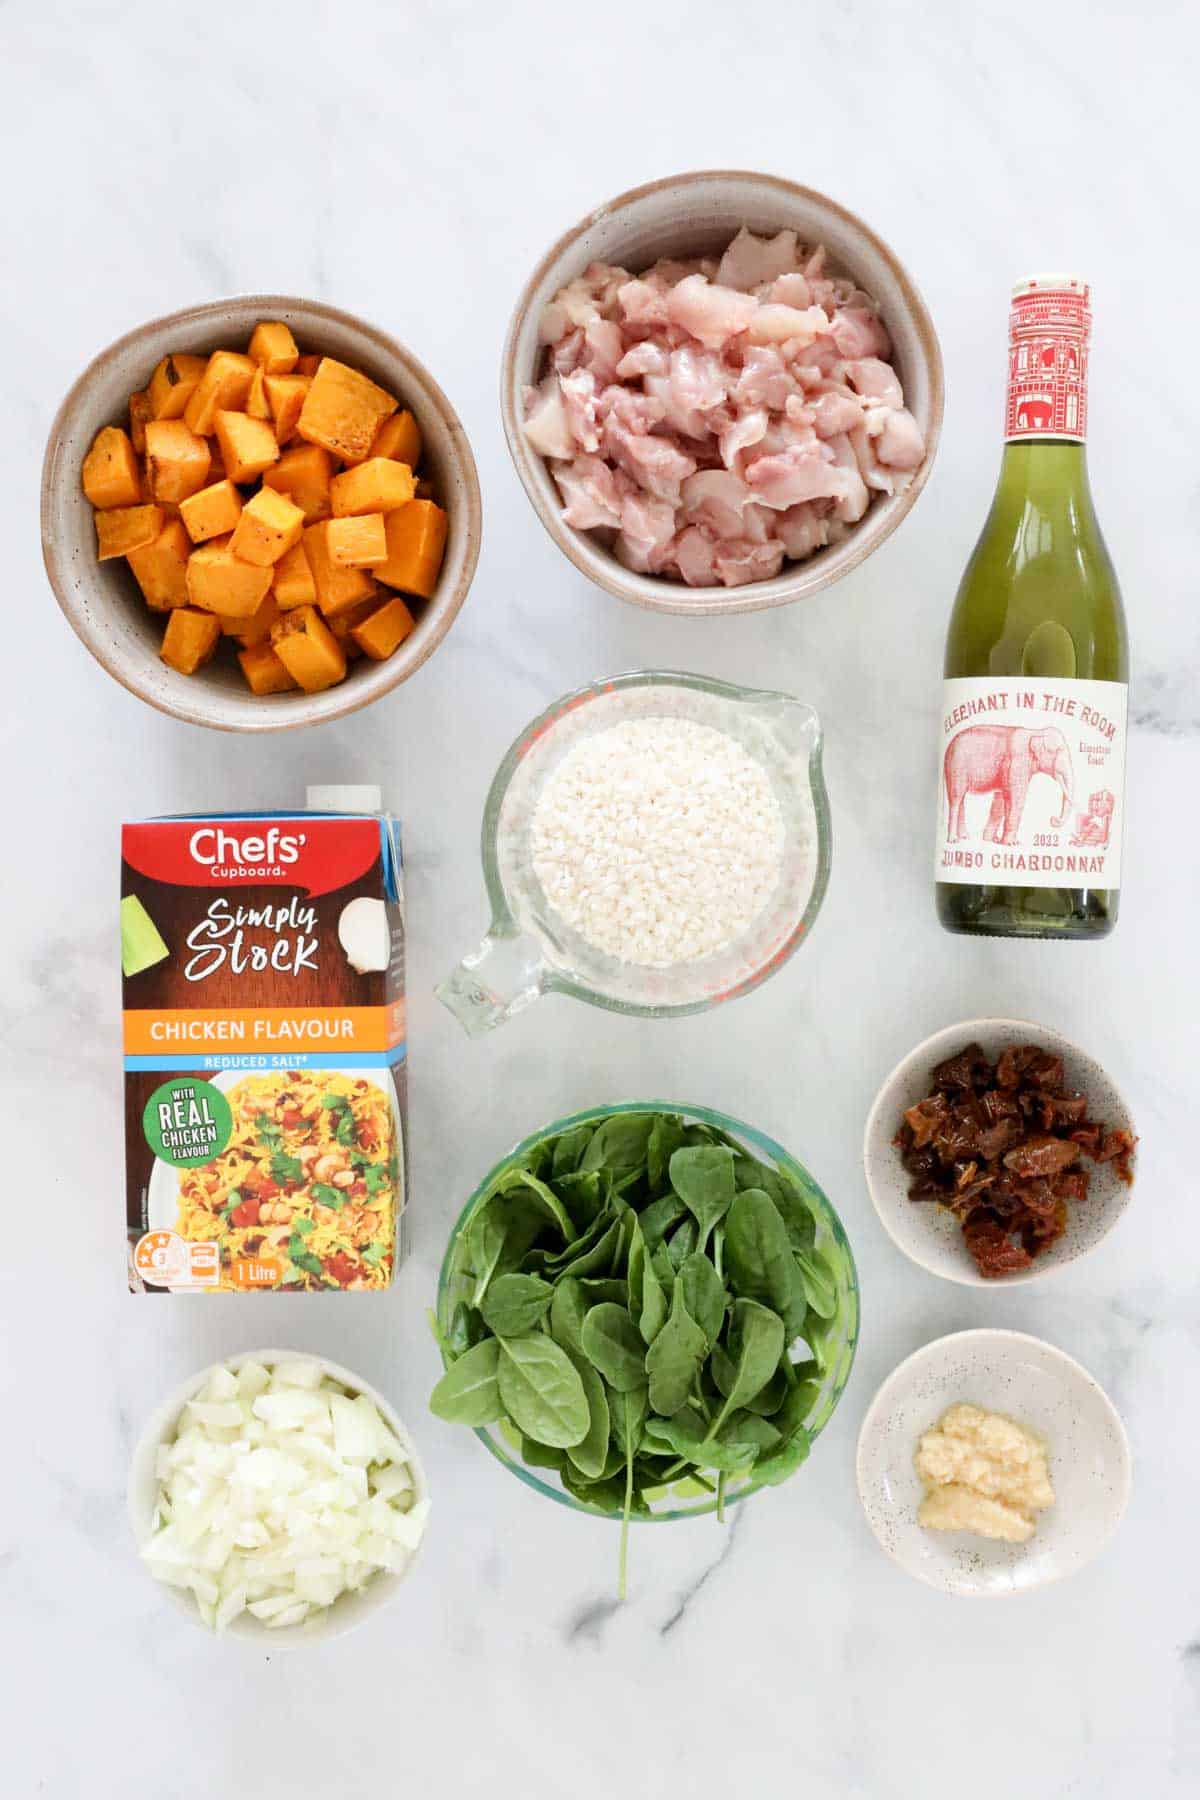 Ingredients needed to make the recipe placed in individual bowls.